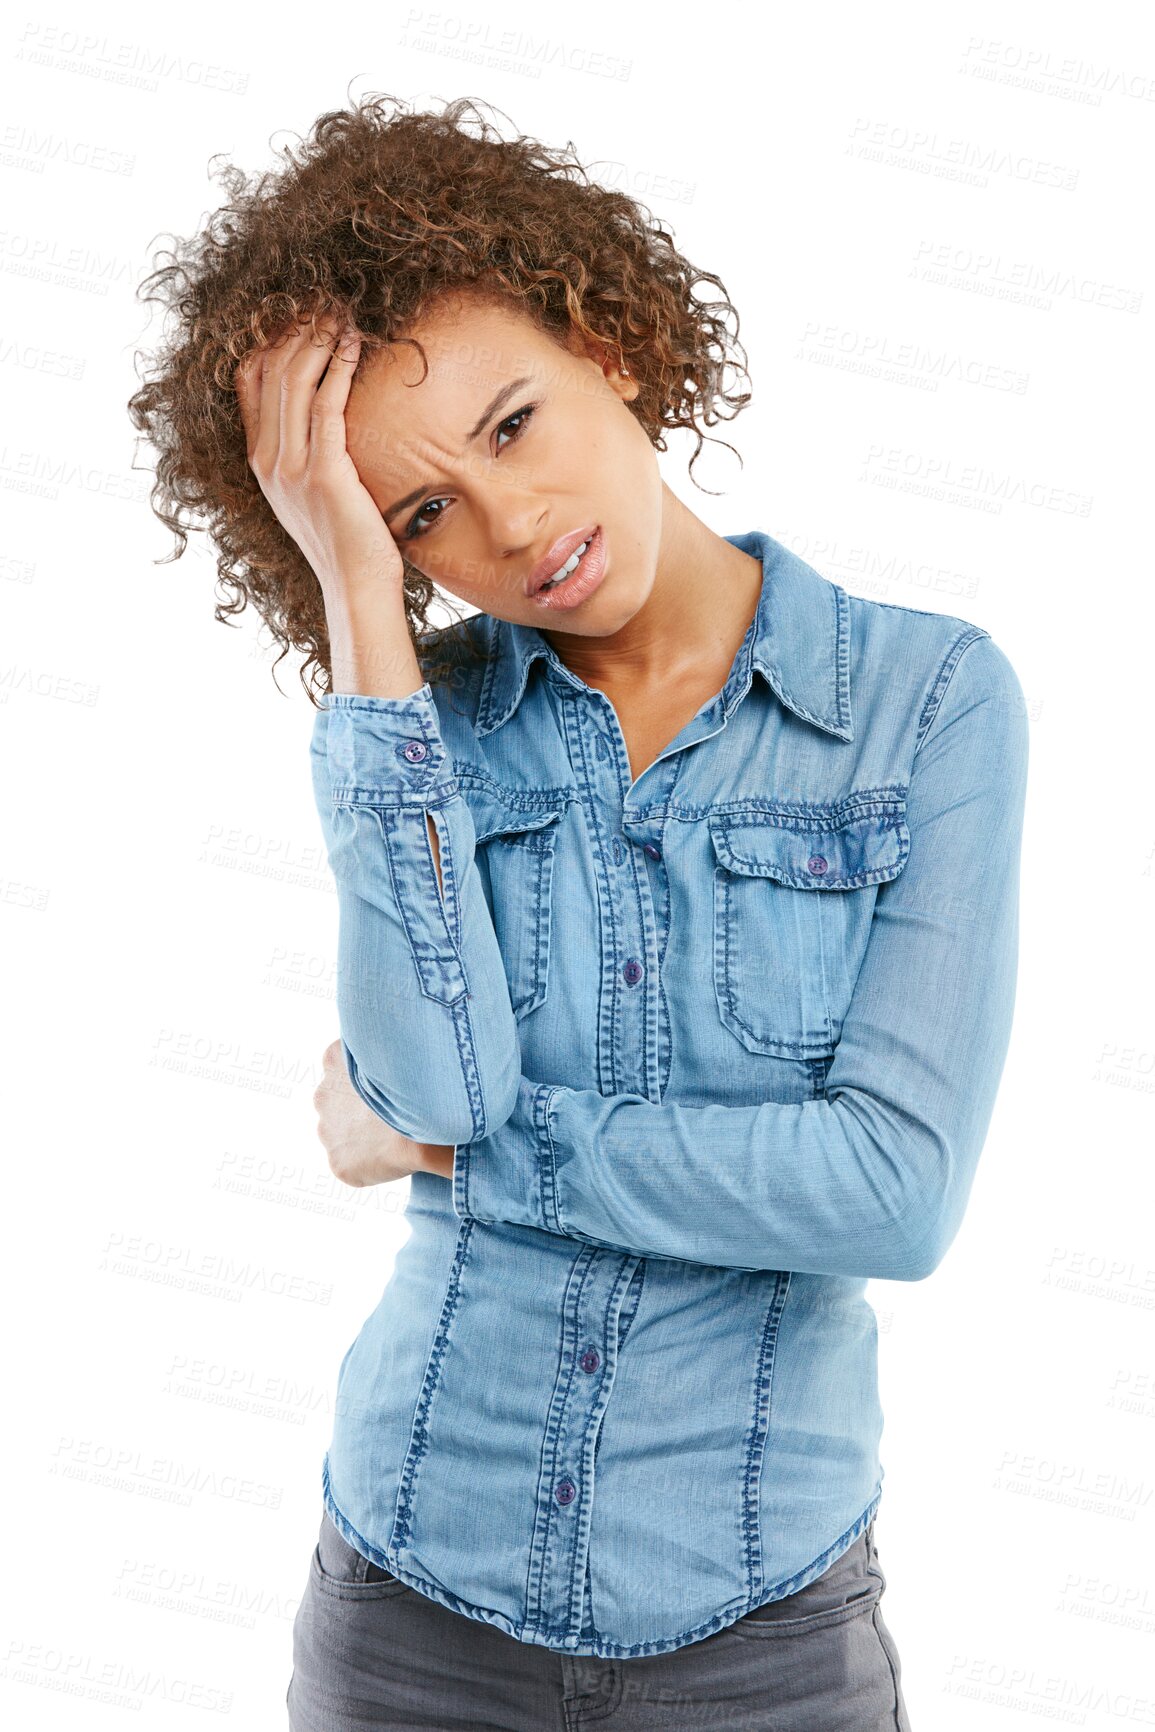 Buy stock photo Portrait, headache or regret with an unhappy woman isolated on a transparent background to express emotion. Sad, depression and anxiety with a young female person looking sad or asking why on PNG